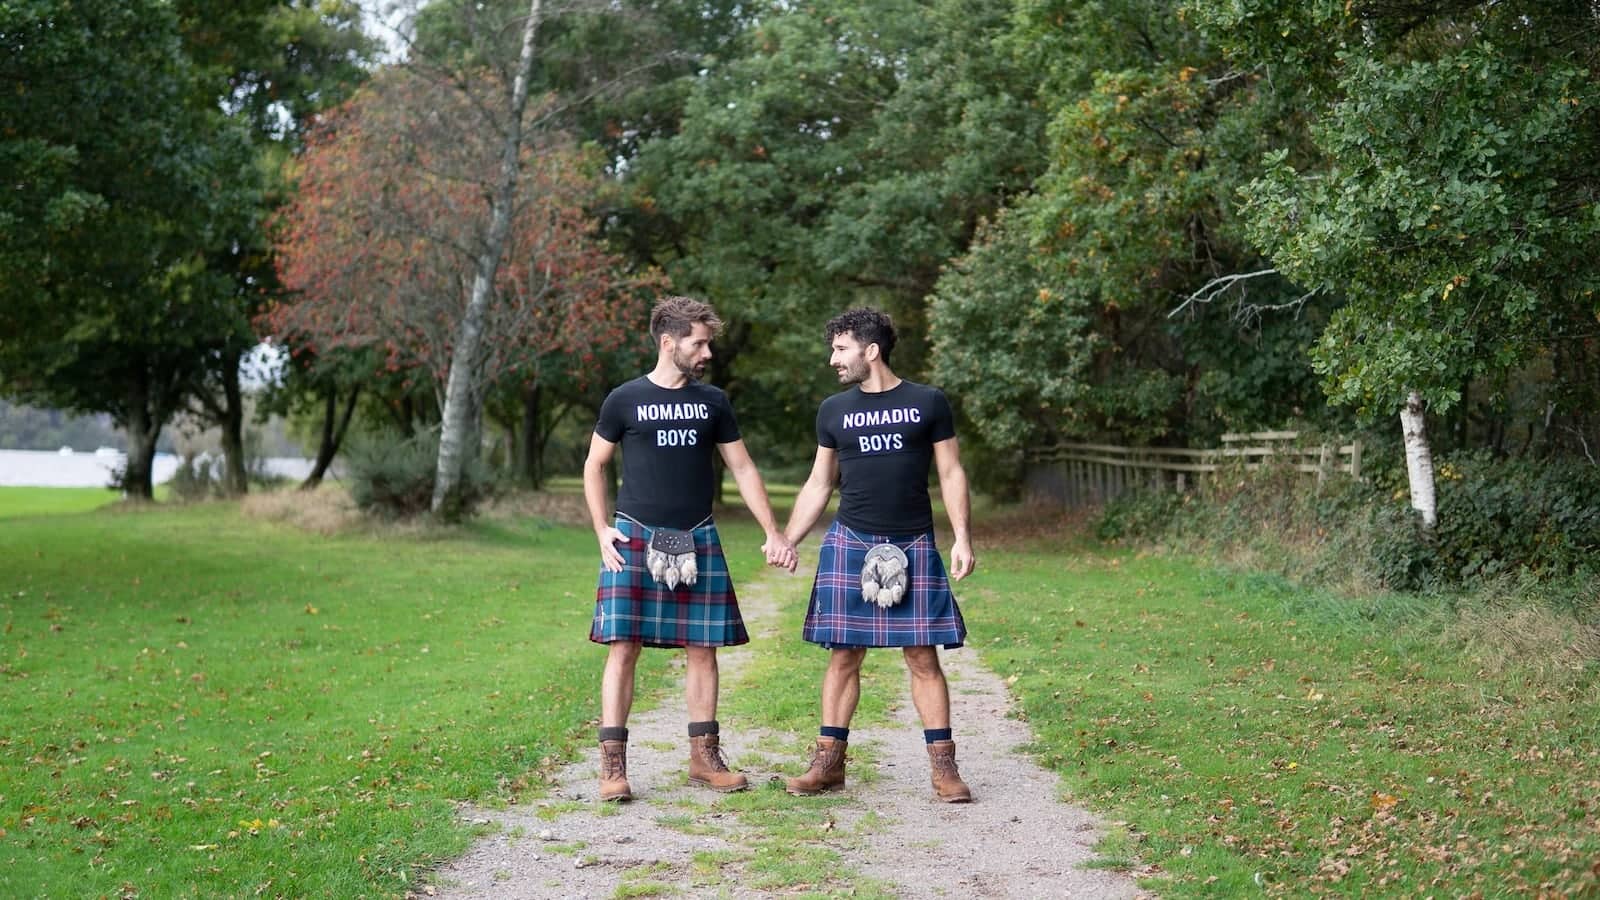 Nomadic Boys gay couple wearing branded t shirts with their kilt in Loch Lomond, Scotland.